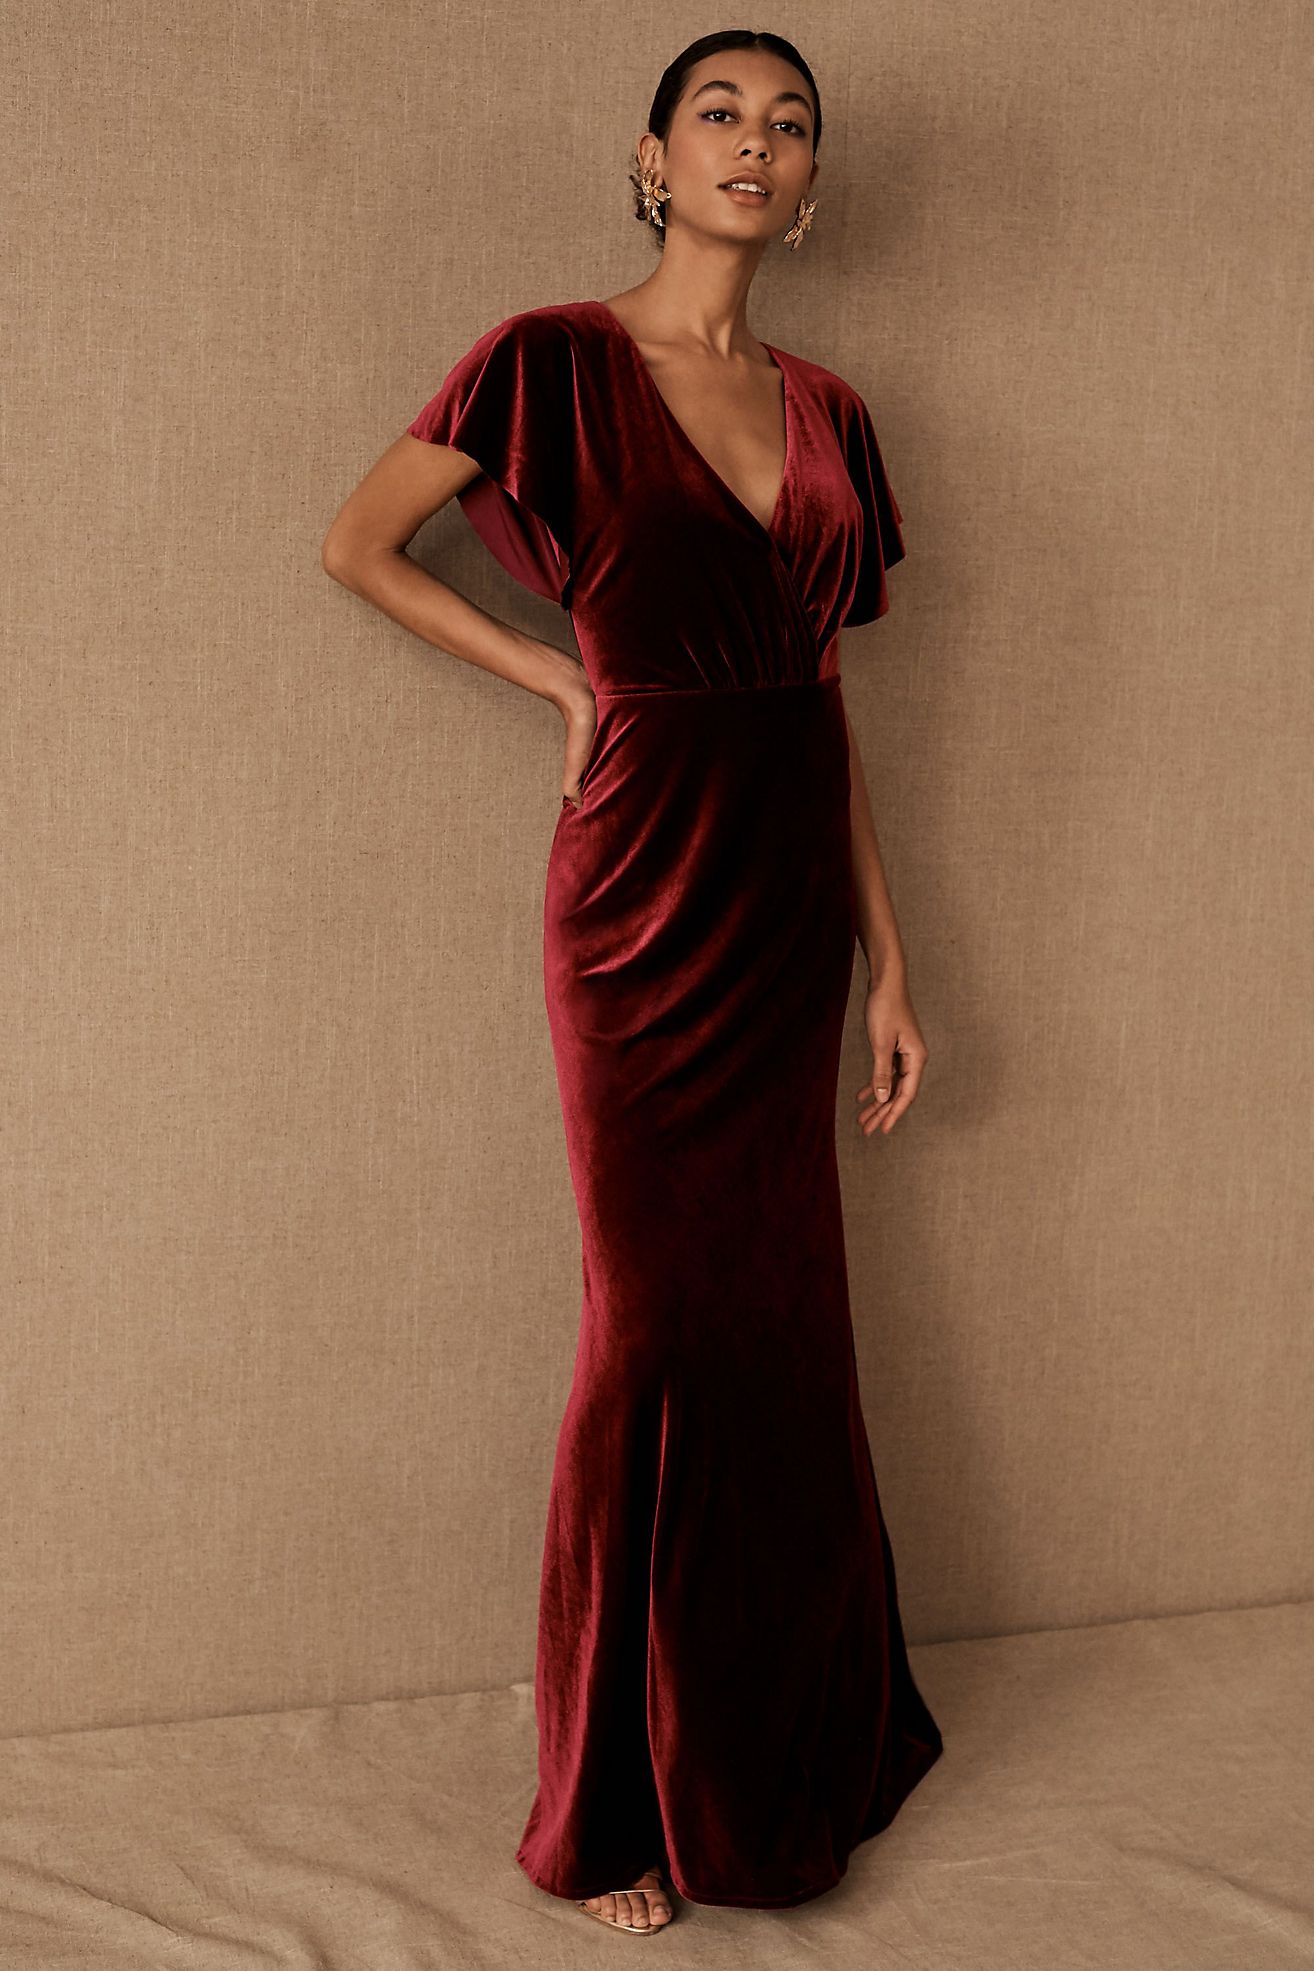 A young darker-skinned model poses against a tan background, wearing floor-length deep red velvet dress with a deep v neckline and flutter sleeves.